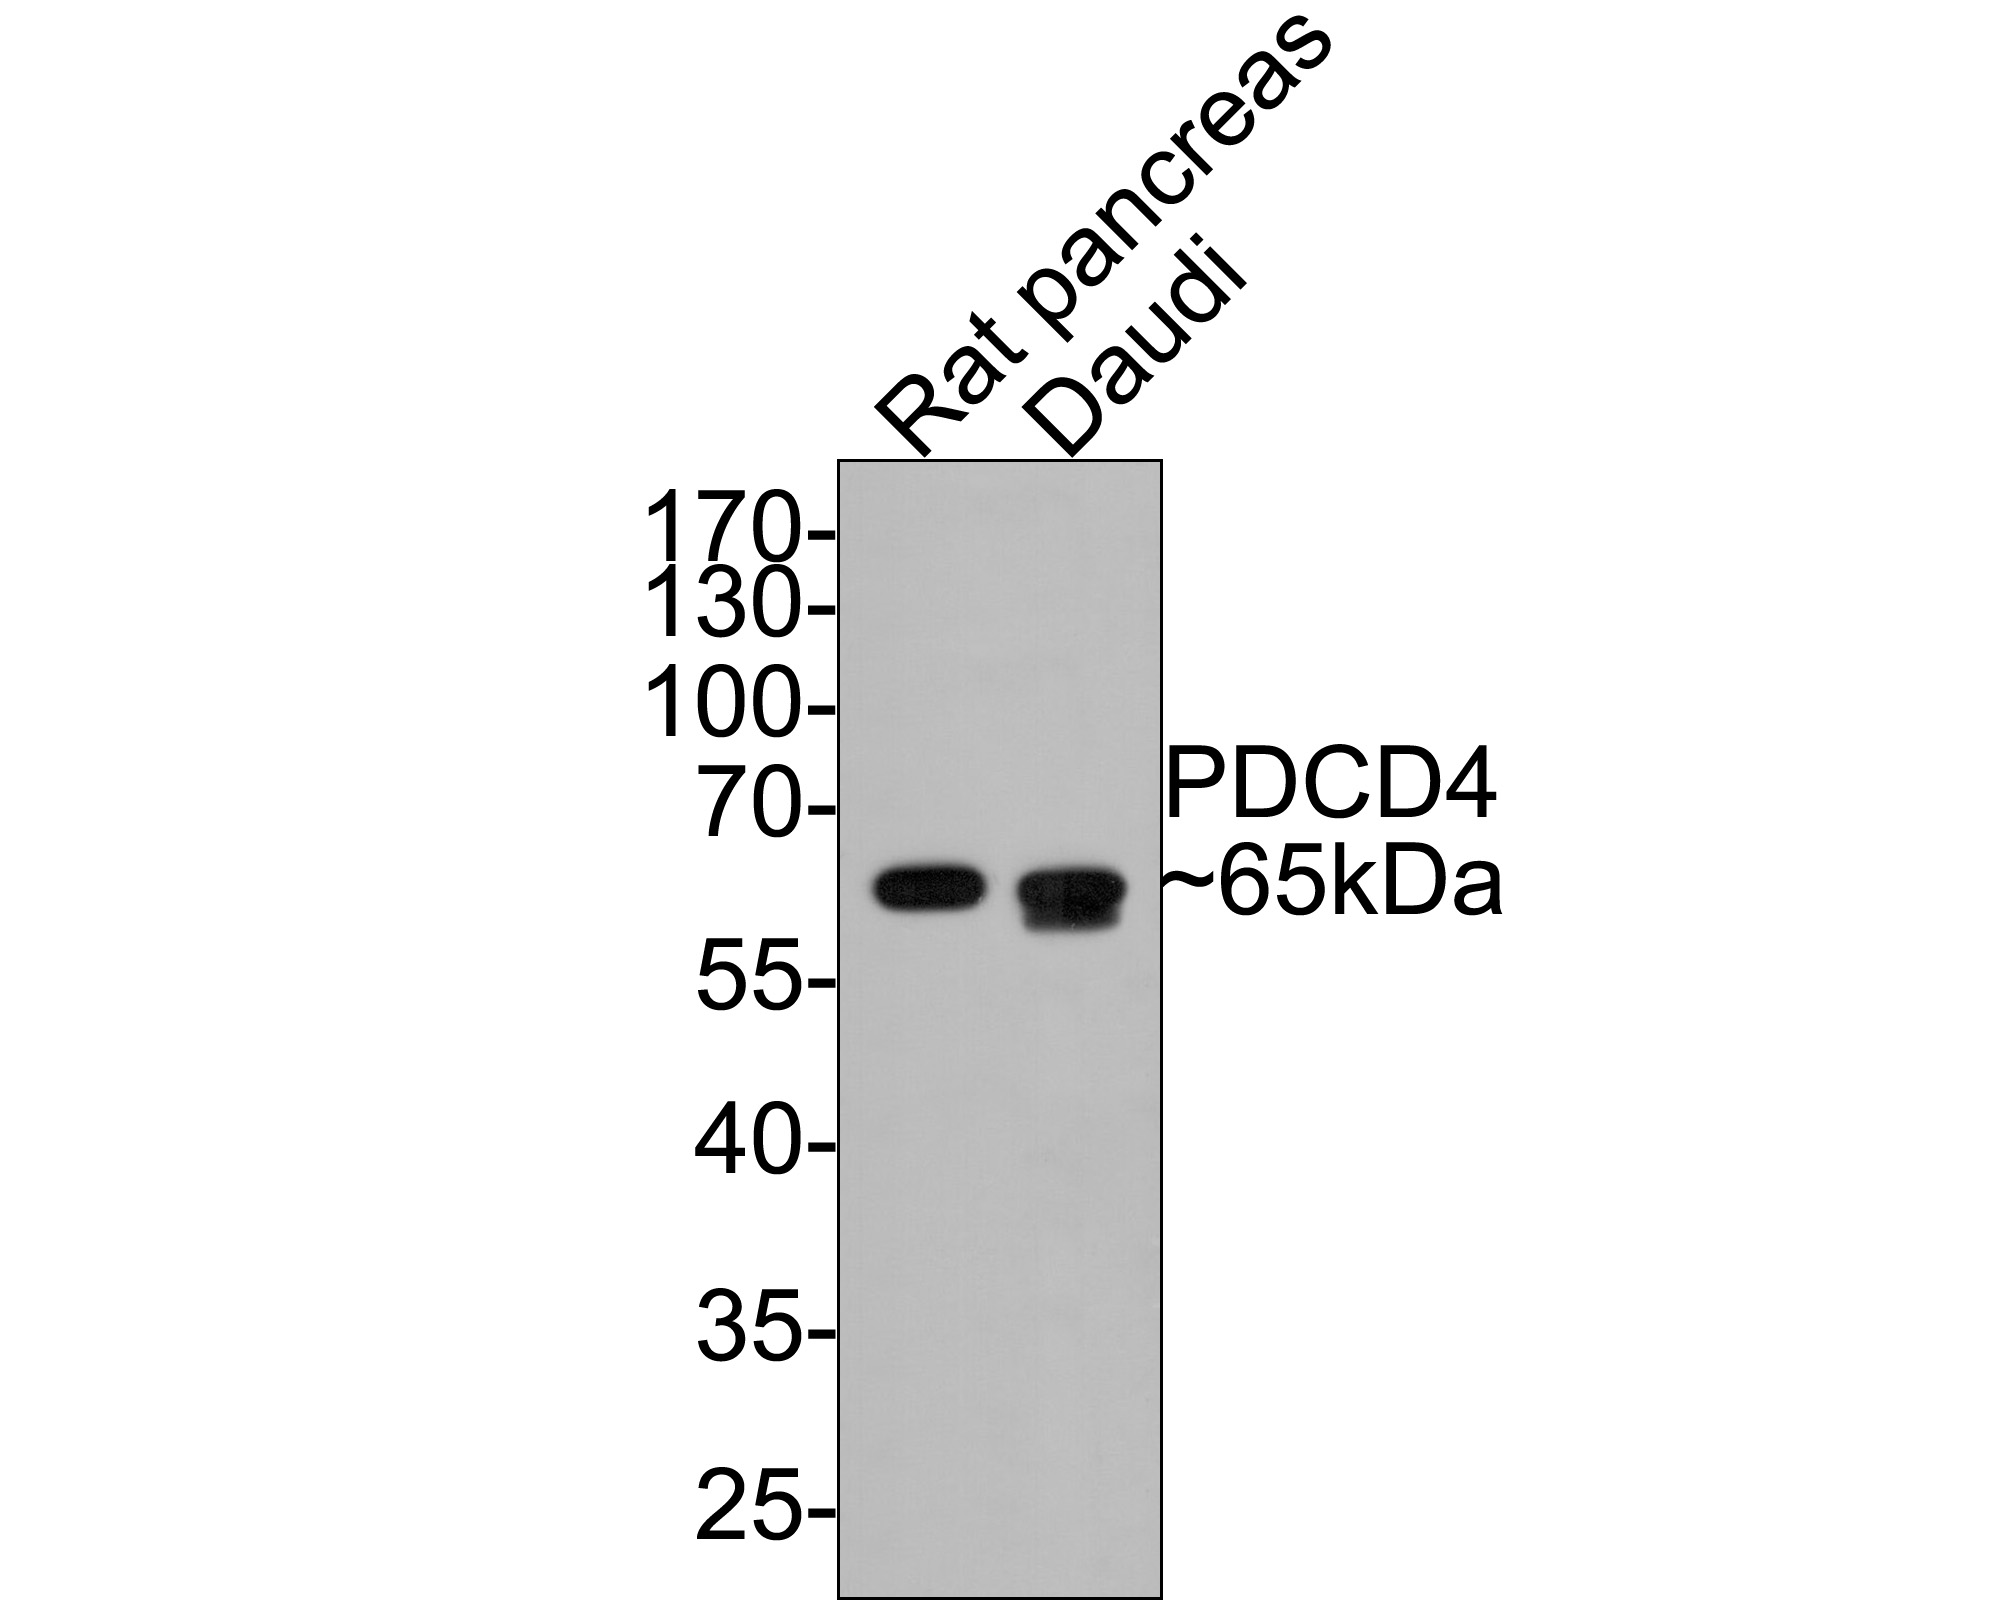 Western blot analysis of PDCD4 on different lysates with Rabbit anti-PDCD4 antibody (ET1704-70) at 1/500 dilution.<br />
<br />
Lane 1: Rat pancreas tissue lysate (20 µg/Lane)<br />
Lane 2: Daudi cell lysate (10 µg/Lane)<br />
<br />
Predicted band size: 52 kDa<br />
Observed band size: 65 kDa<br />
<br />
Exposure time: 1 minute;<br />
<br />
10% SDS-PAGE gel.<br />
<br />
Proteins were transferred to a PVDF membrane and blocked with 5% NFDM/TBST for 1 hour at room temperature. The primary antibody (ET1704-70) at 1/500 dilution was used in 5% NFDM/TBST at room temperature for 2 hours. Goat Anti-Rabbit IgG - HRP Secondary Antibody (HA1001) at 1:300,000 dilution was used for 1 hour at room temperature.